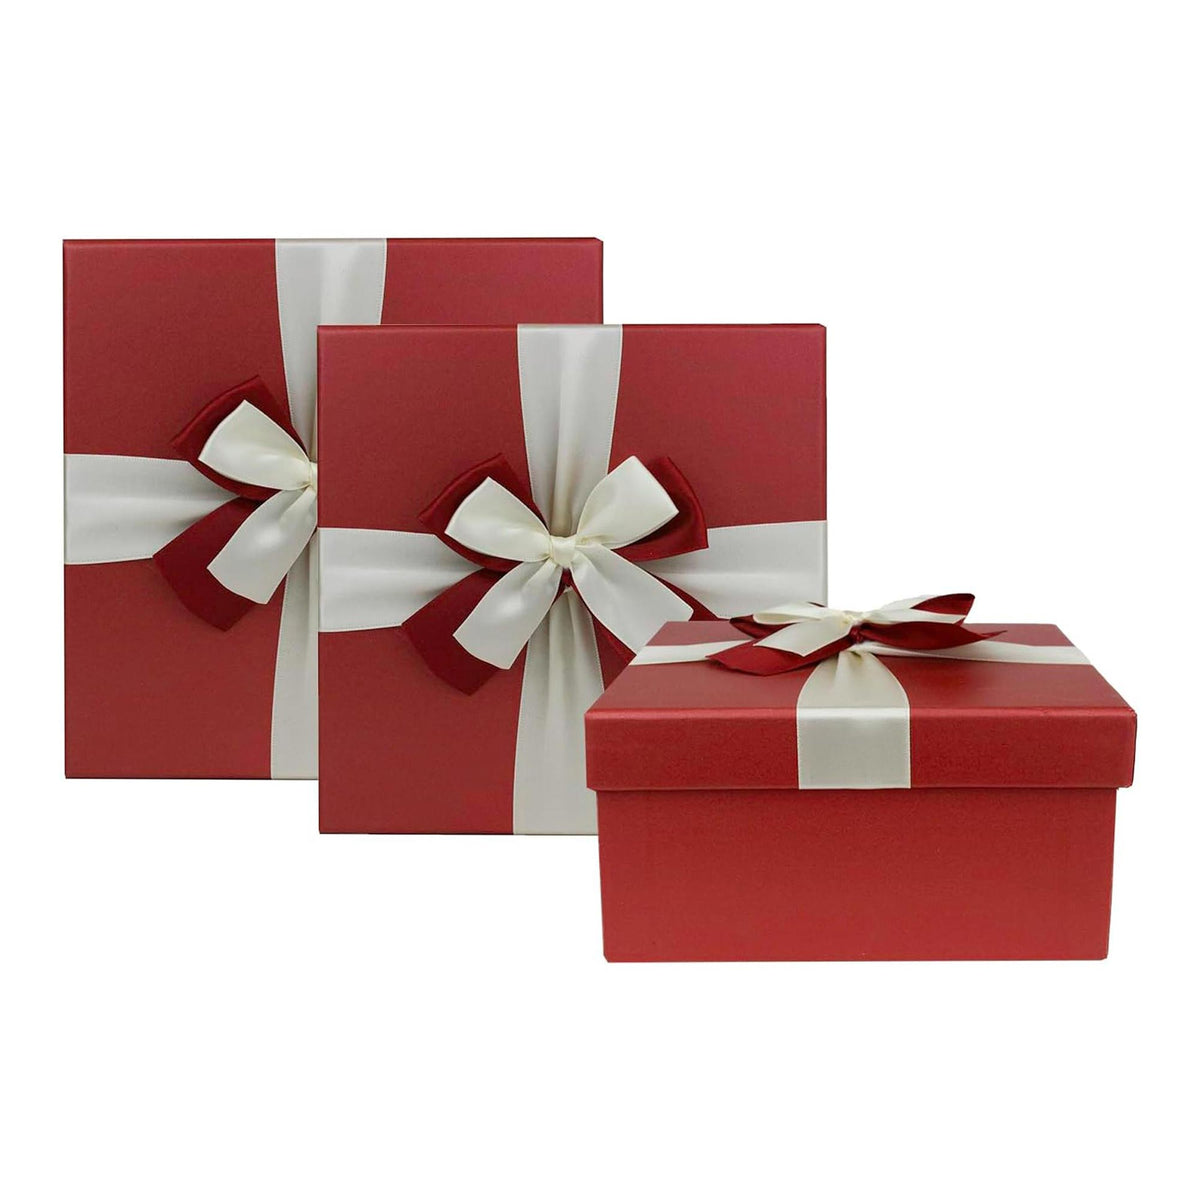 Set of 3 Square Red Gift Boxes with White Satin Ribbon